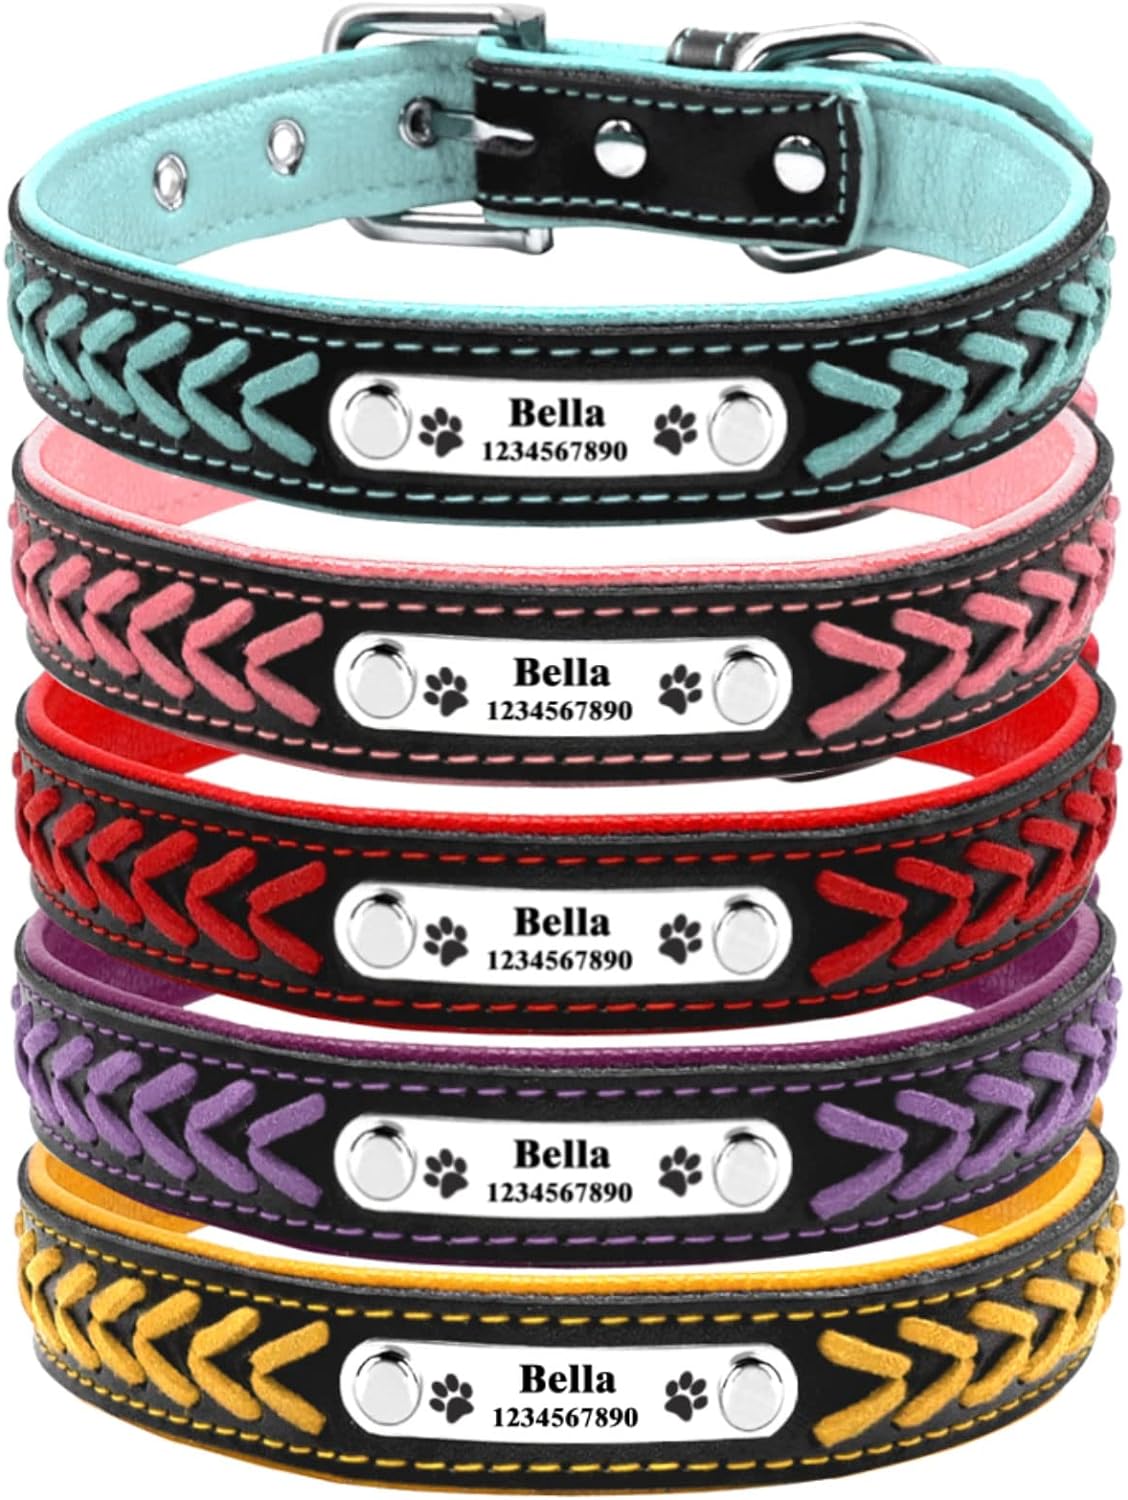 Personalized Dog Collars for Small, Medium, and Large Dogs